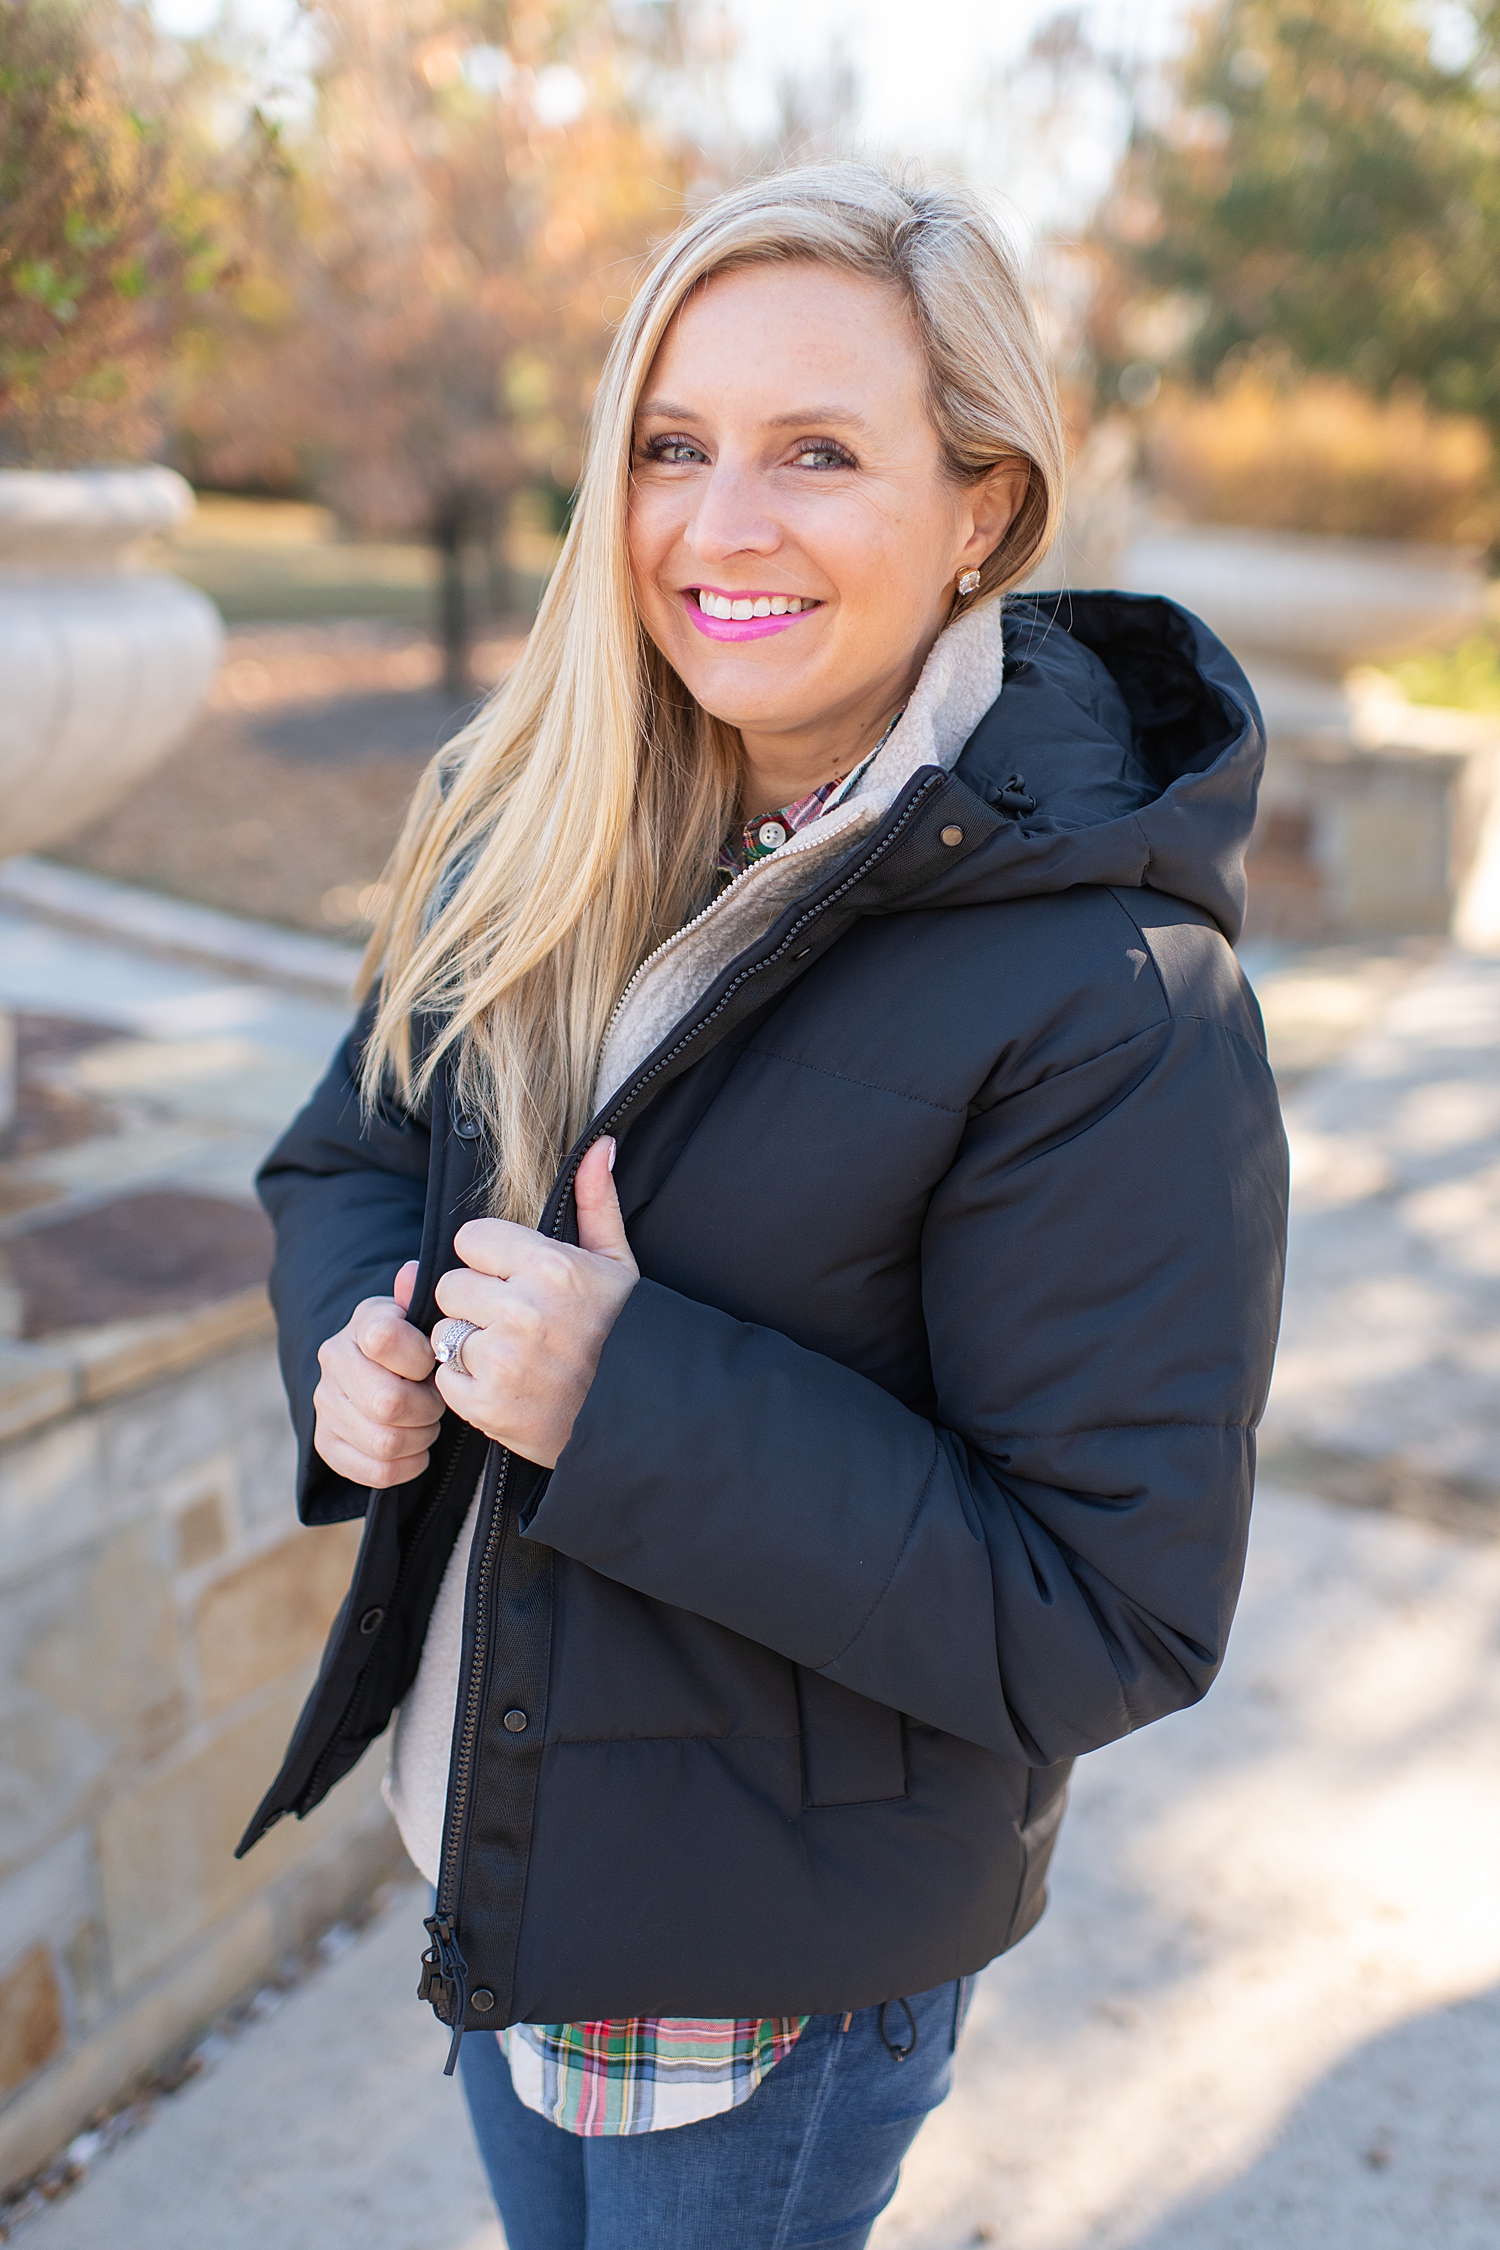 The Best Cozy Gift Ideas featured by top Houston fashion blogger, Fancy Ashley: picture of a blonde woman wearing a black Everyone puffer jacket, Everlane zip fleece, J.Crew tartan shirt, J.Crew skinny jeans and Golden Goose sneakers